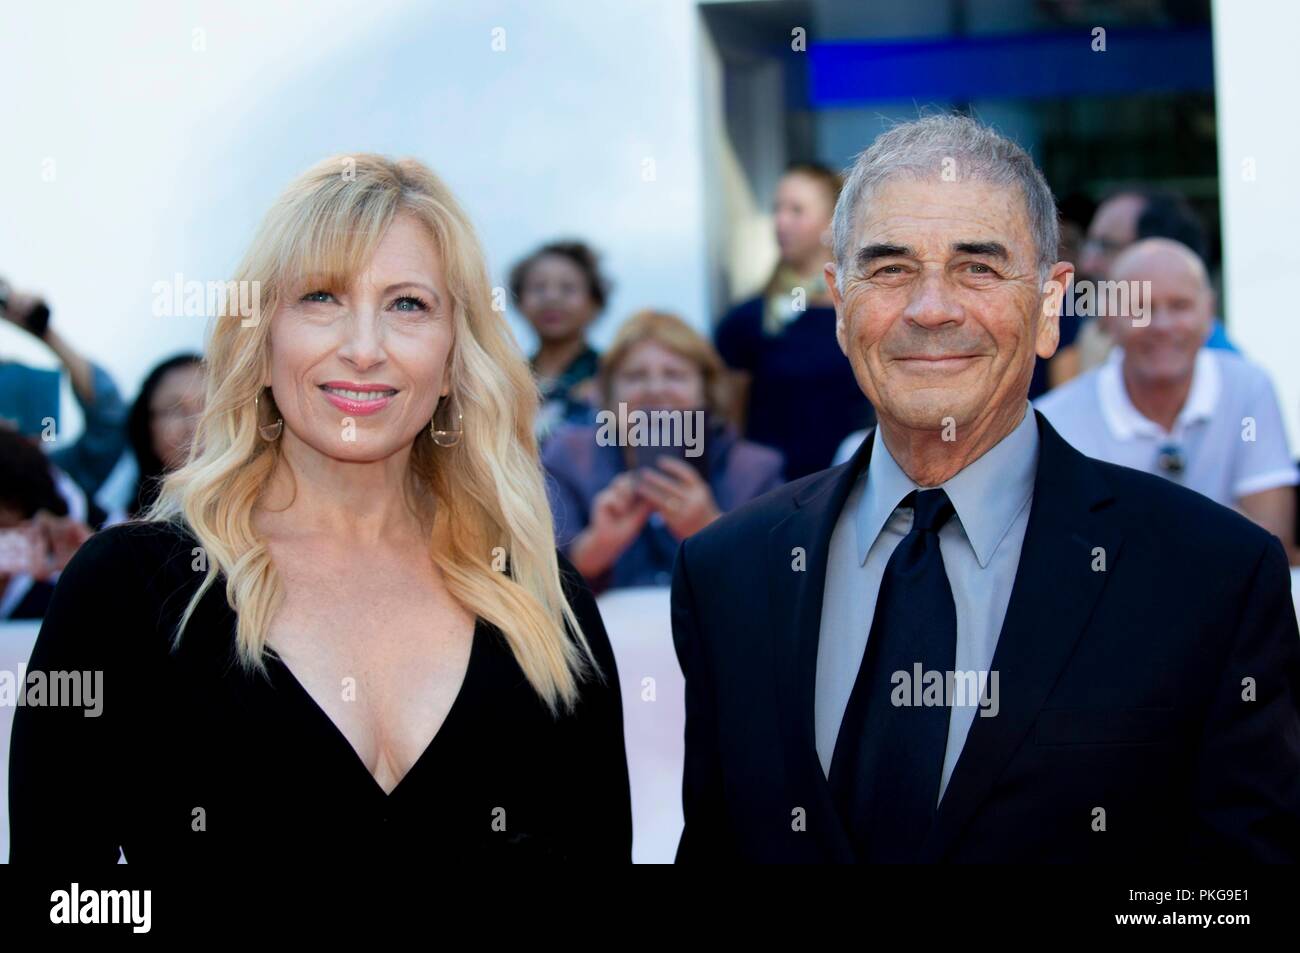 Robert Forster and Evie Forster attend the premiere of 'What They Said' during the 43rd Toronto International Film Festival, tiff, at Roy Thomson Hall in Toronto, Canada, on 12 September 2018. | usage worldwide Stock Photo